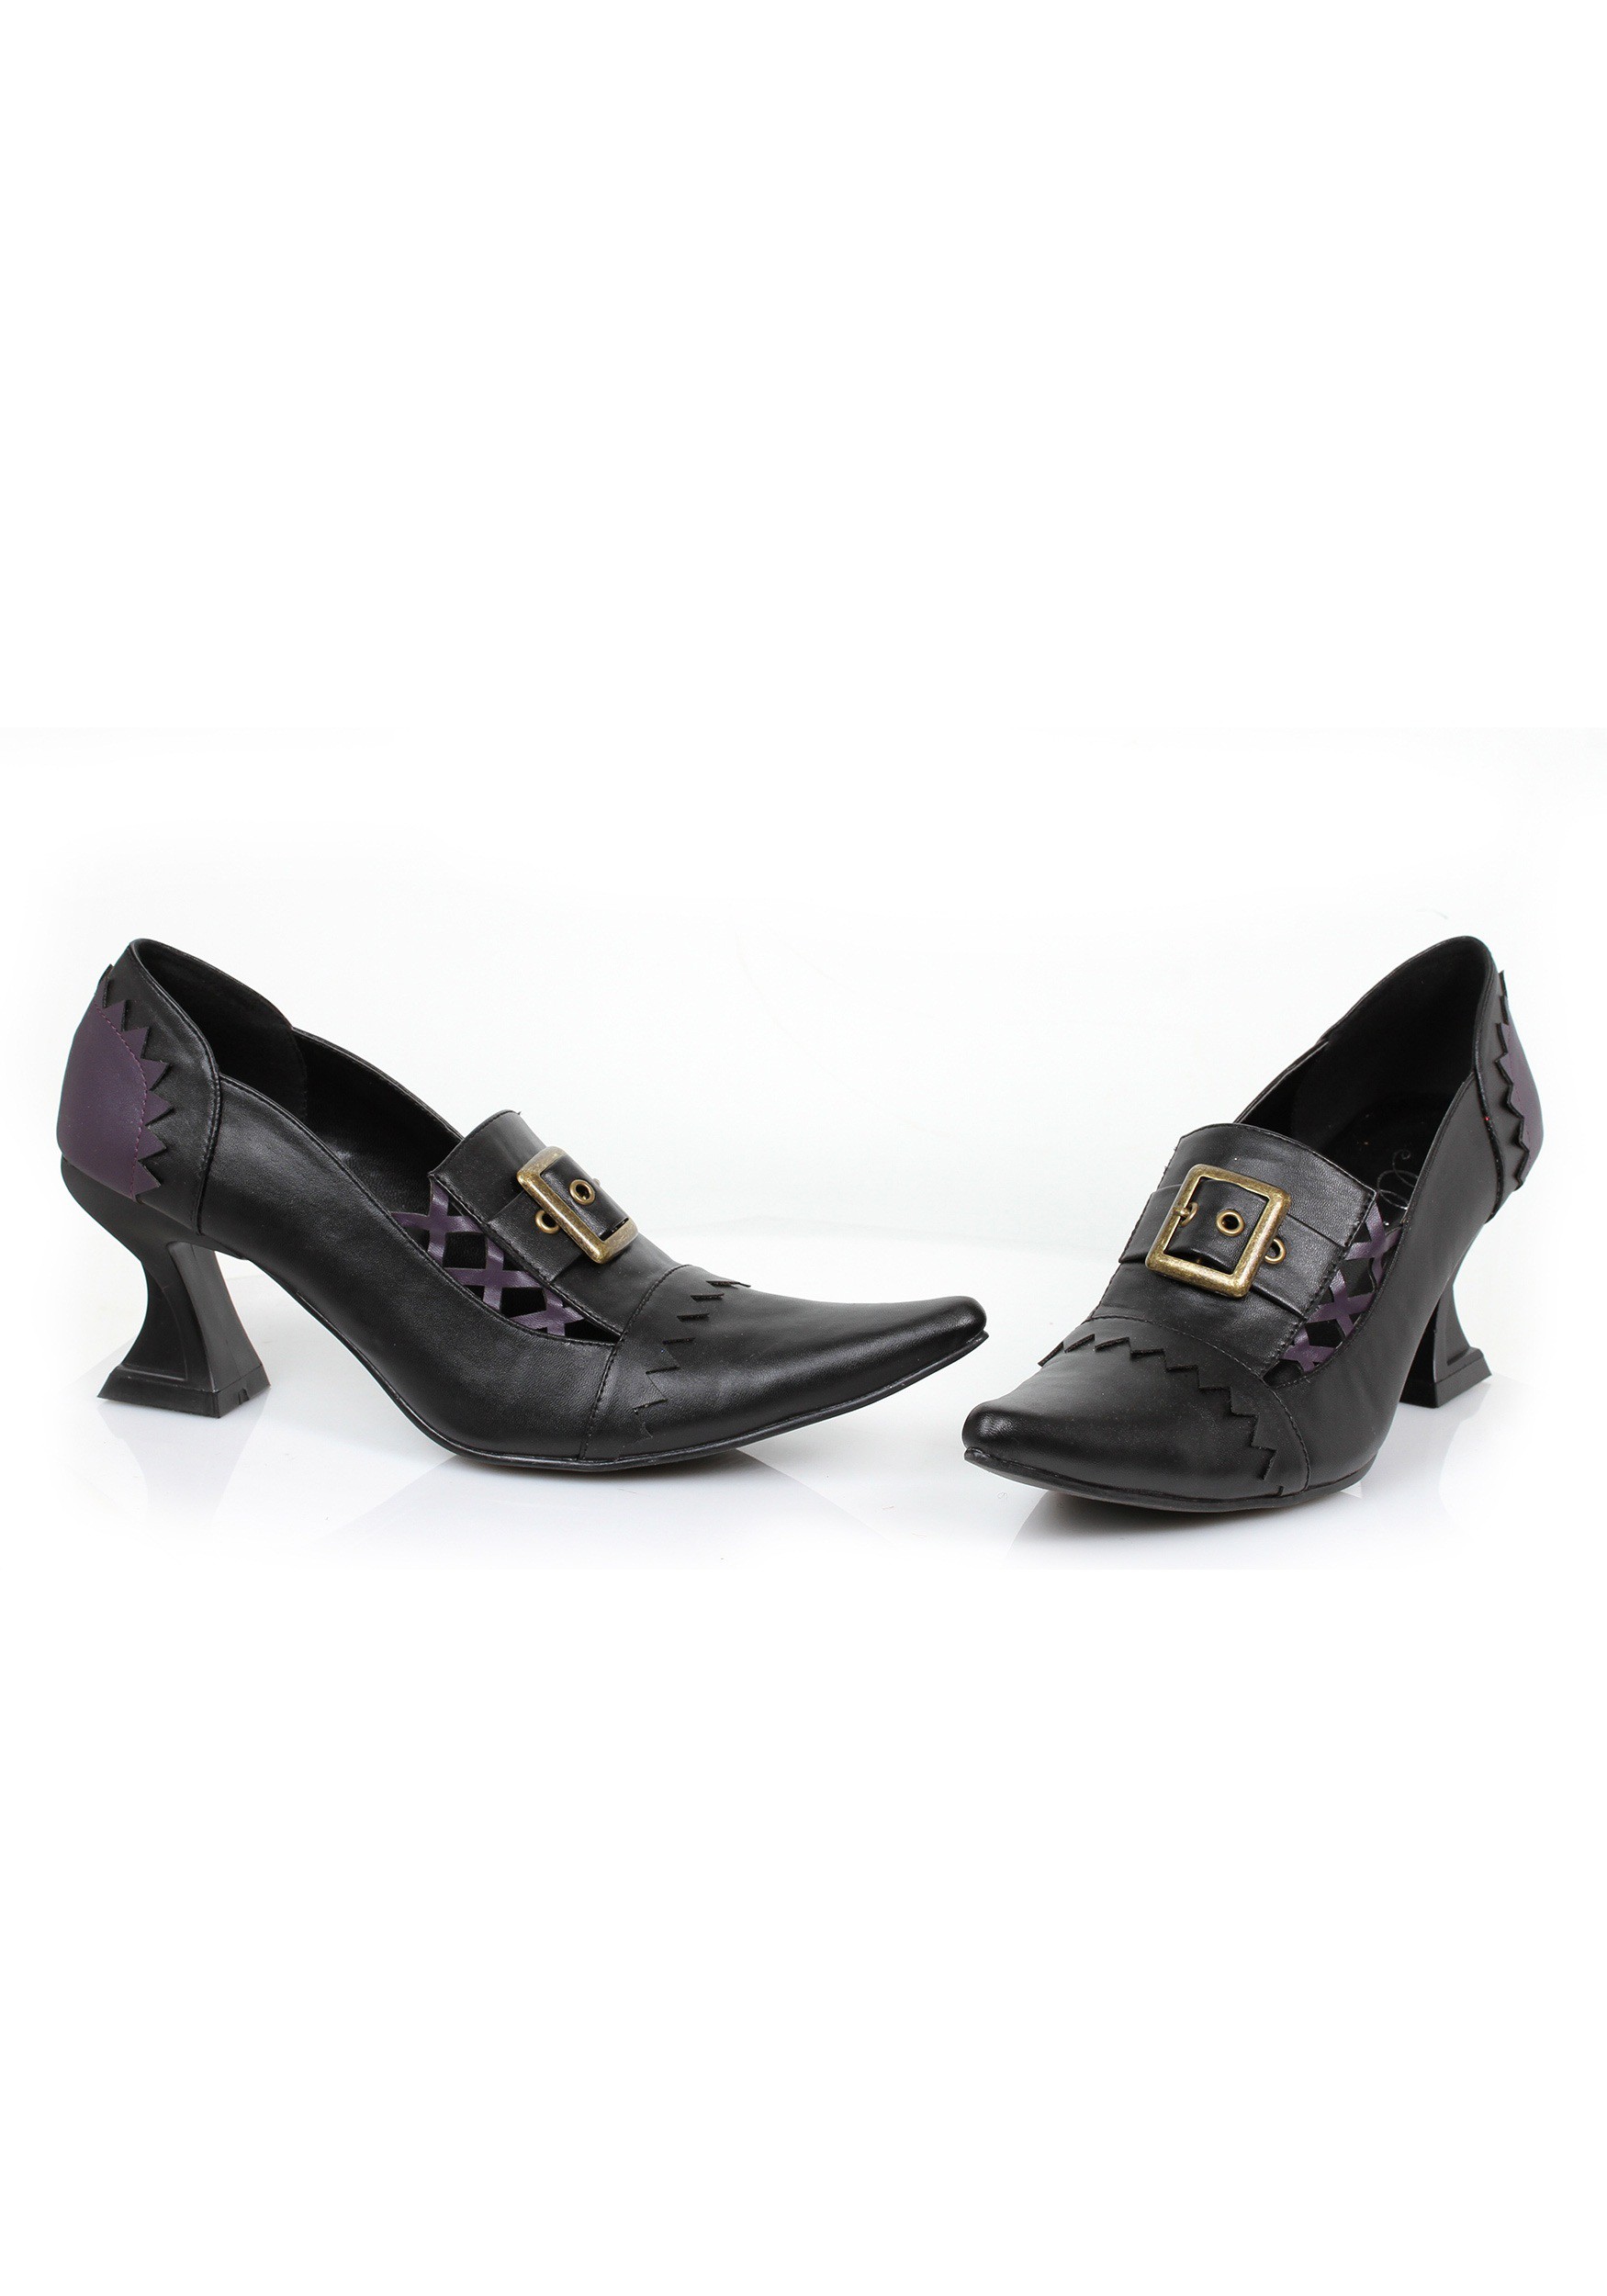 Women’s Deluxe Witch Shoes